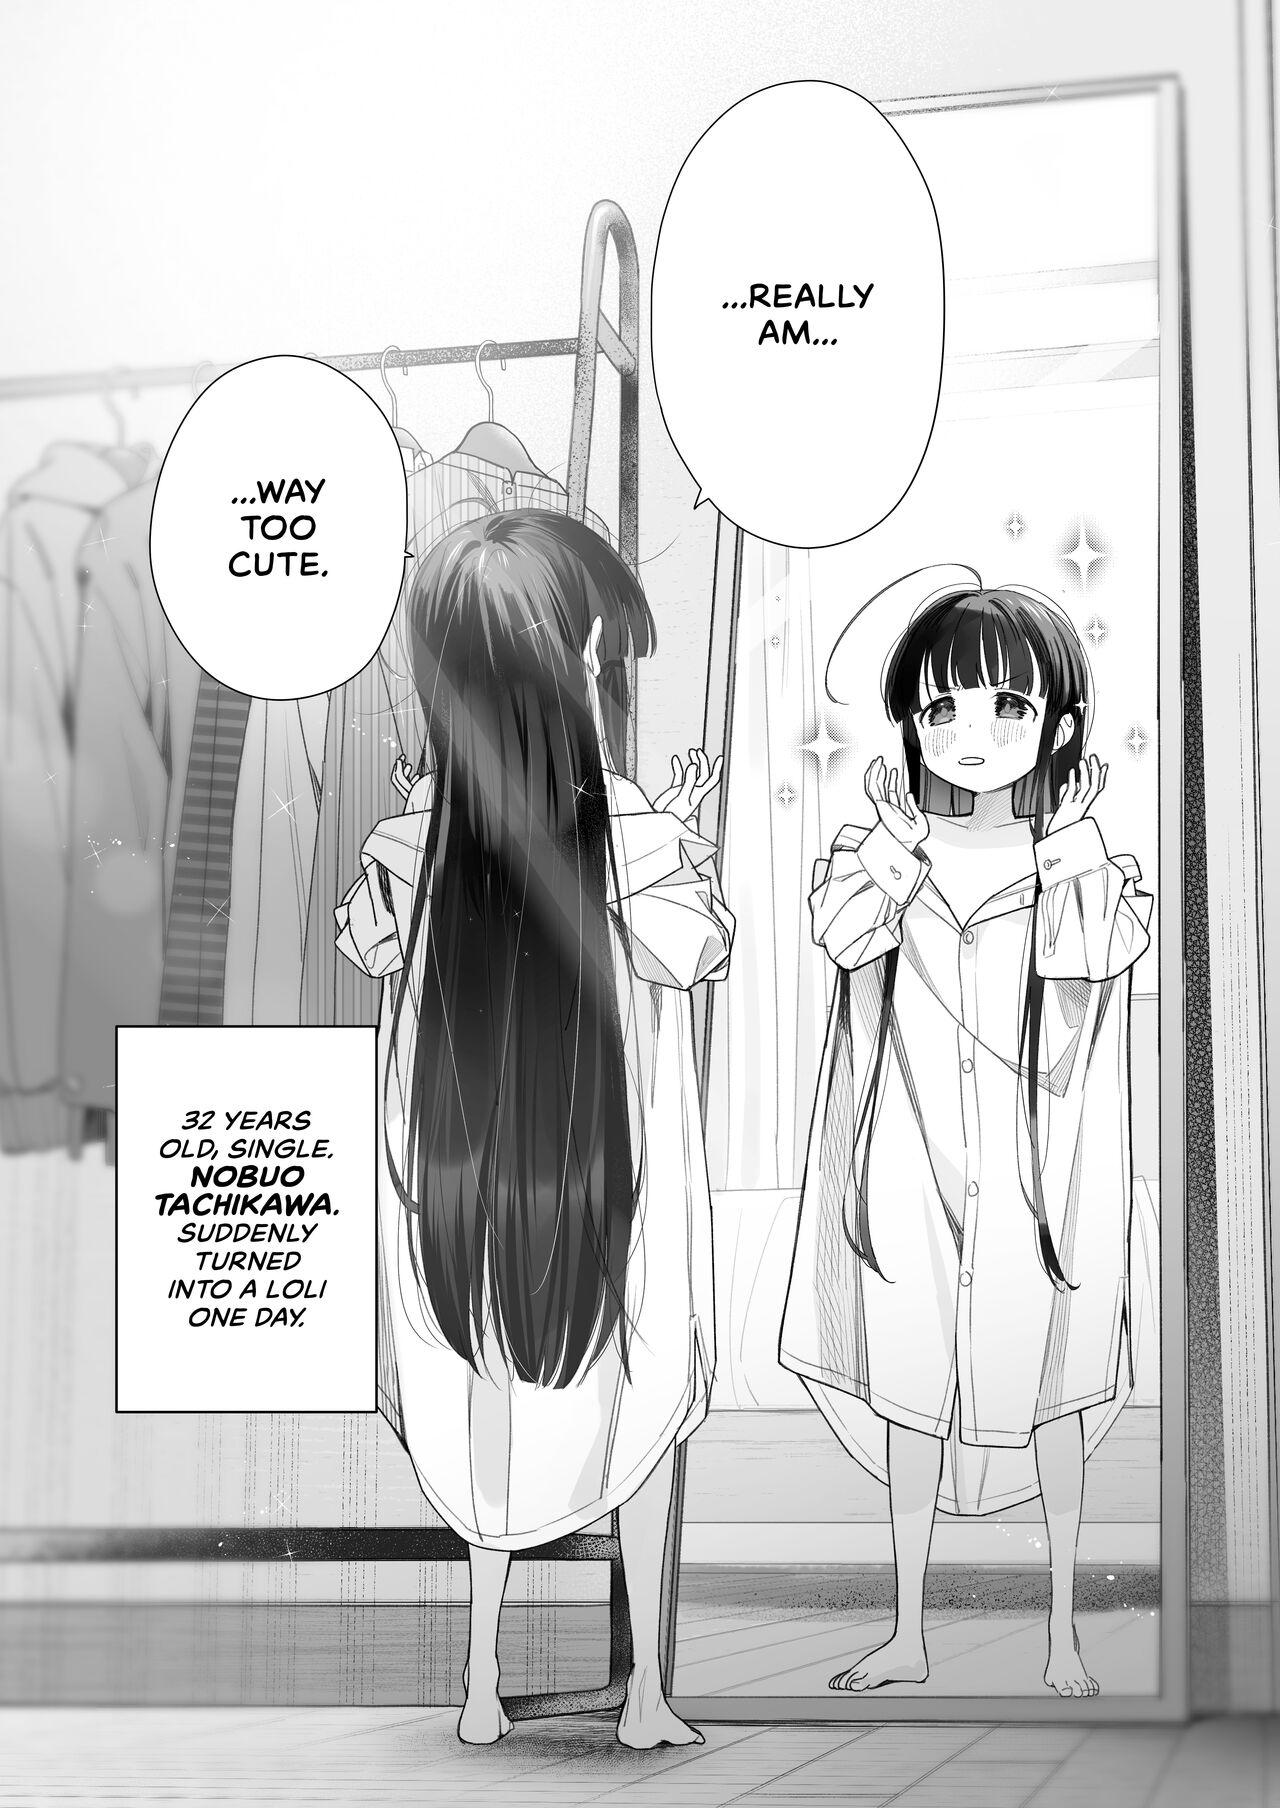 Big Boobs [Asunaro Neat. (Ronna)] TS Loli Oji-san no Bouken Onanie Hen | The Adventures of an Old Man Who Was Gender-Swapped Into a Loli ~Masturbation Chapter~ [English] [CulturedCommissions] [Digital] - Original Girl Gets Fucked - Page 3